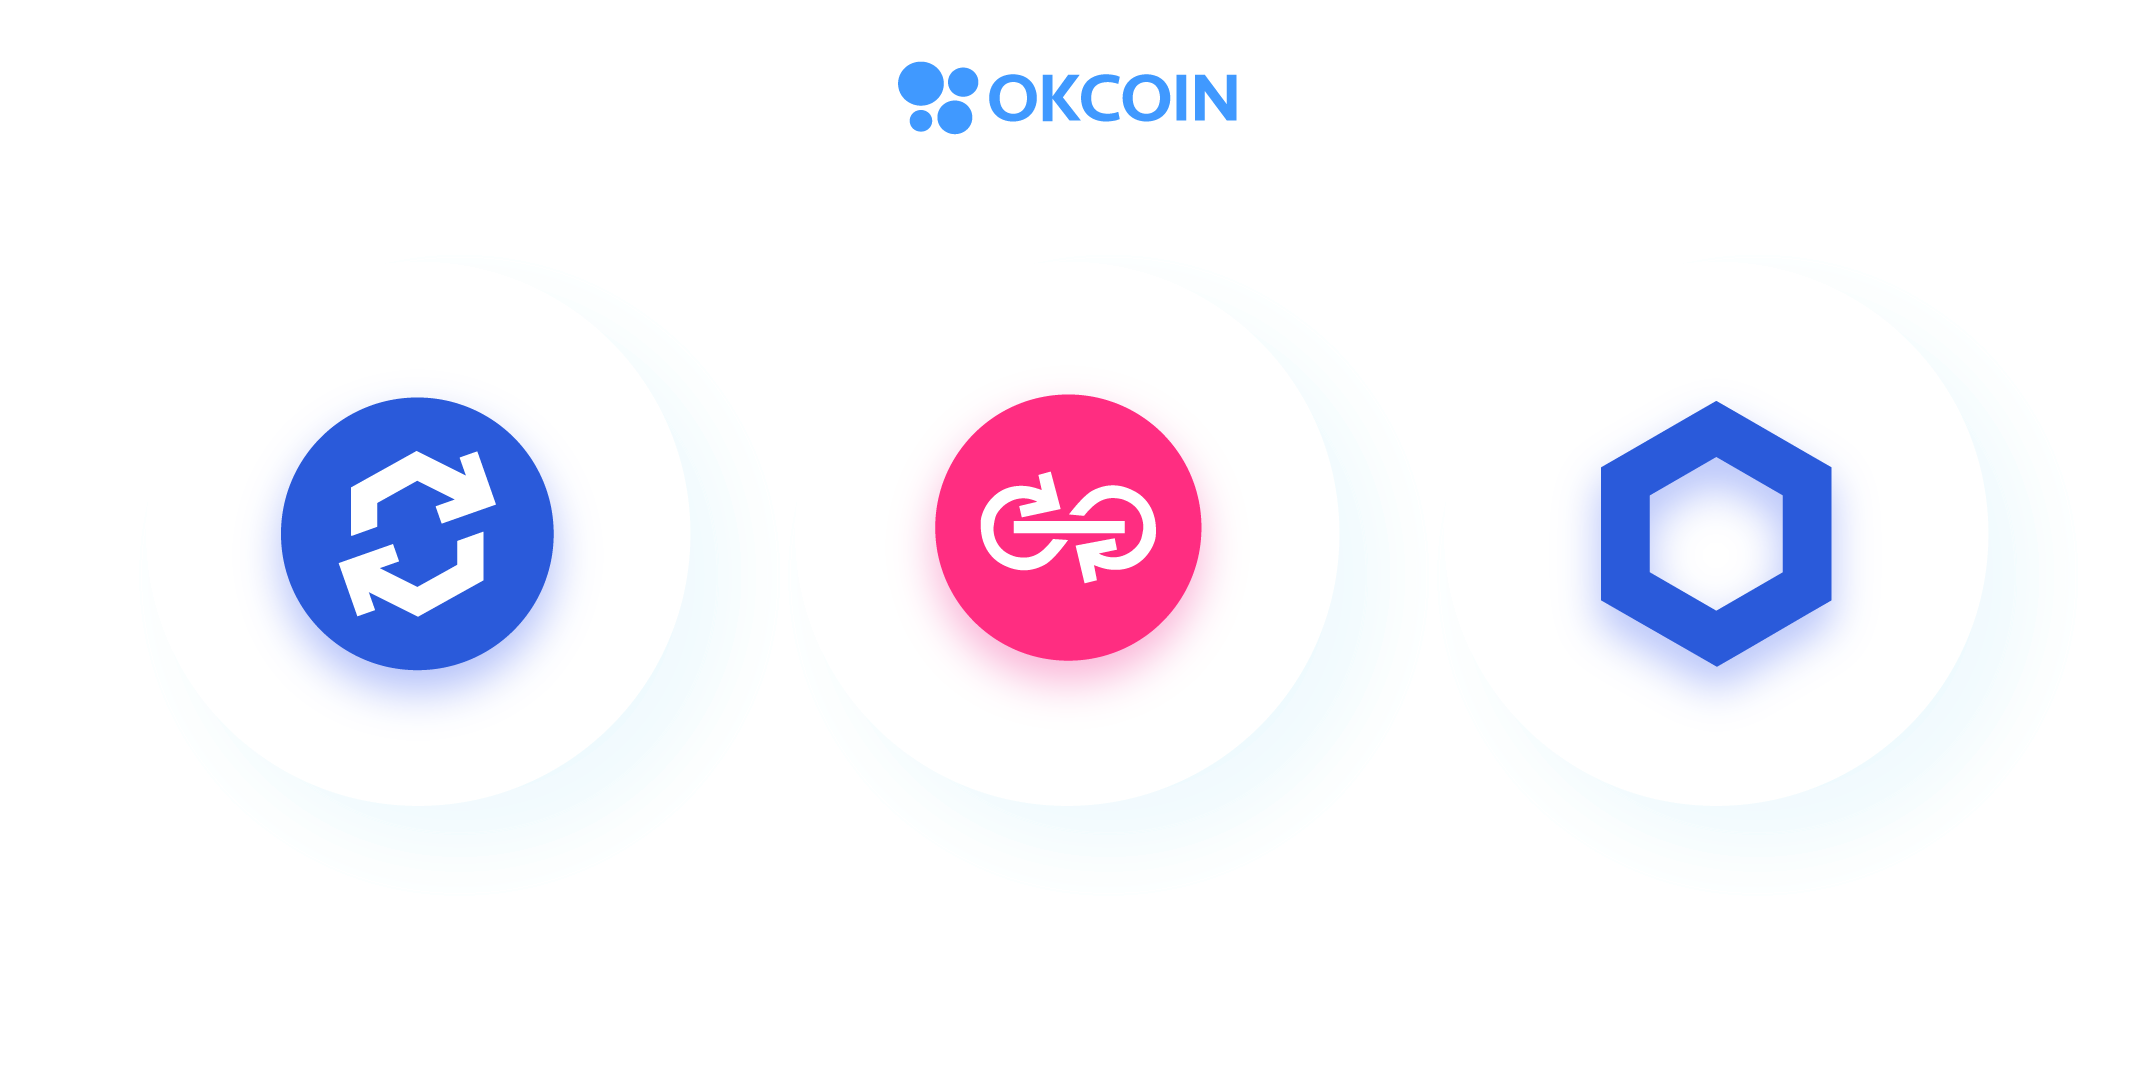 DeFi assets LINK, YFL, and YFII will be coming to OKCoin crypto exchange